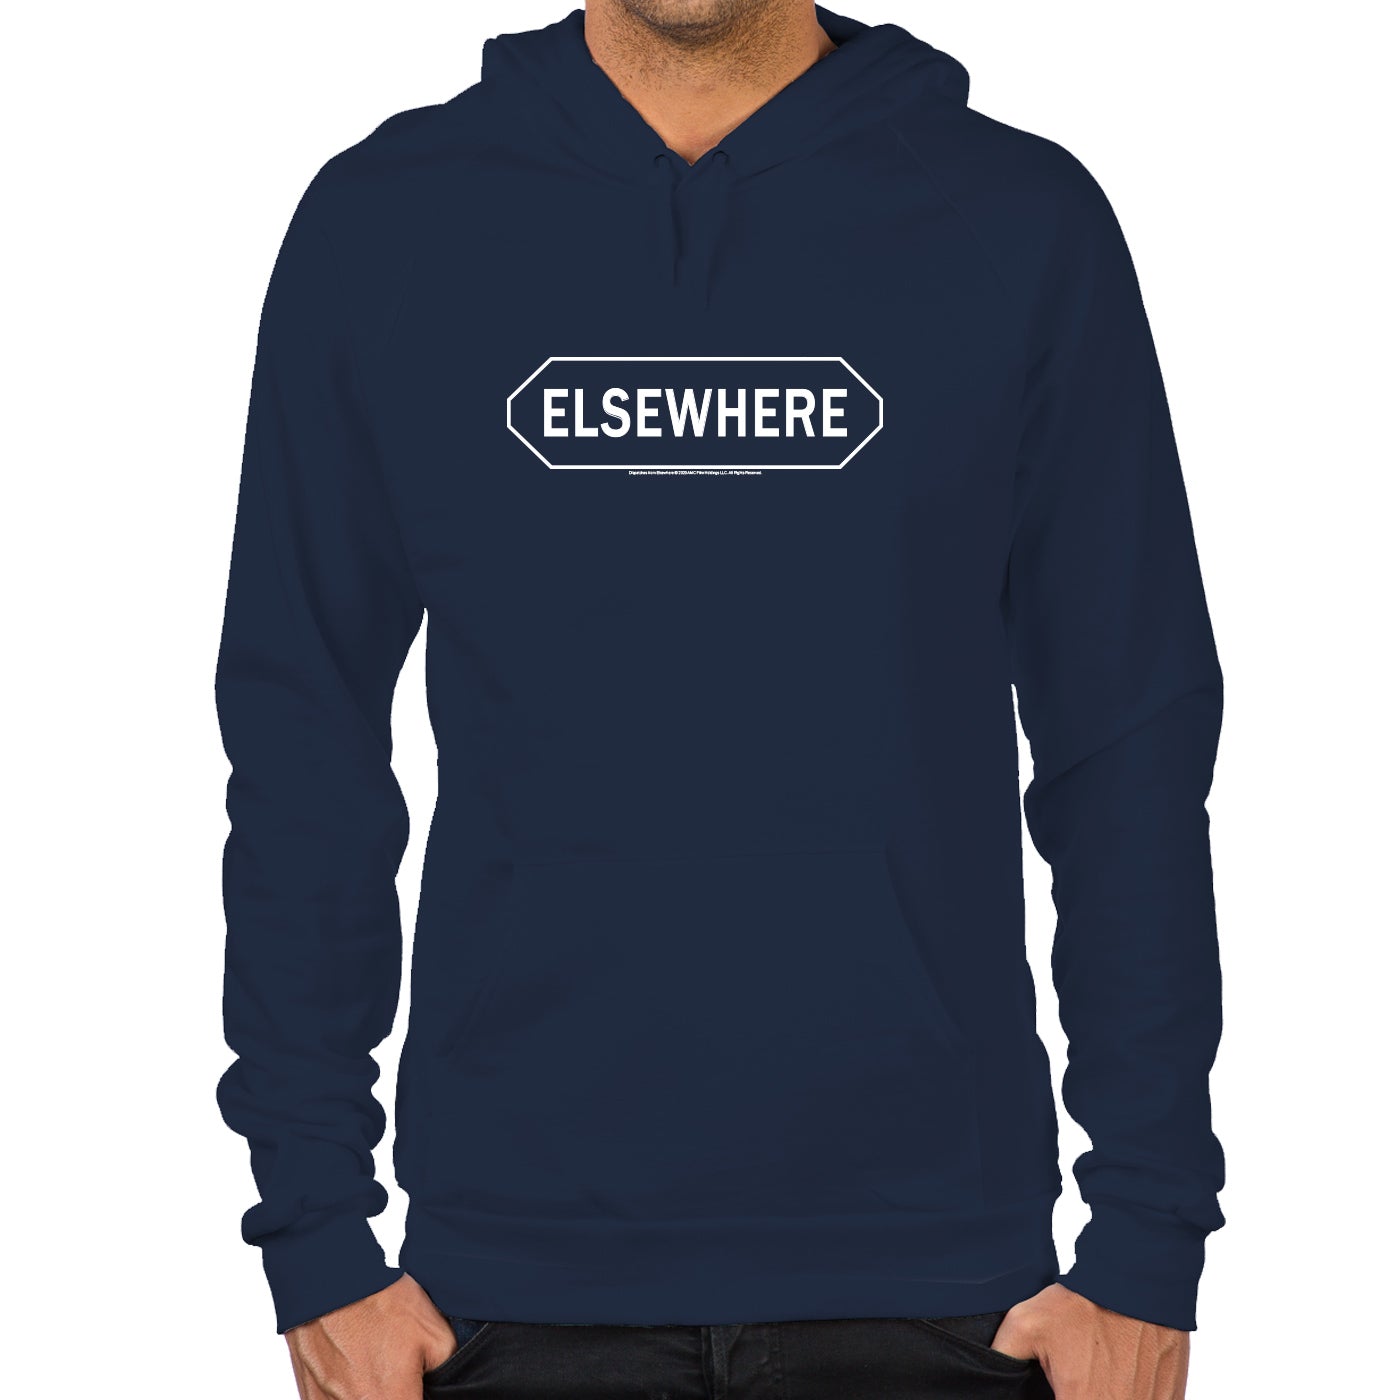 Dispatches From Elsewhere Elsewhere Sweatshirt